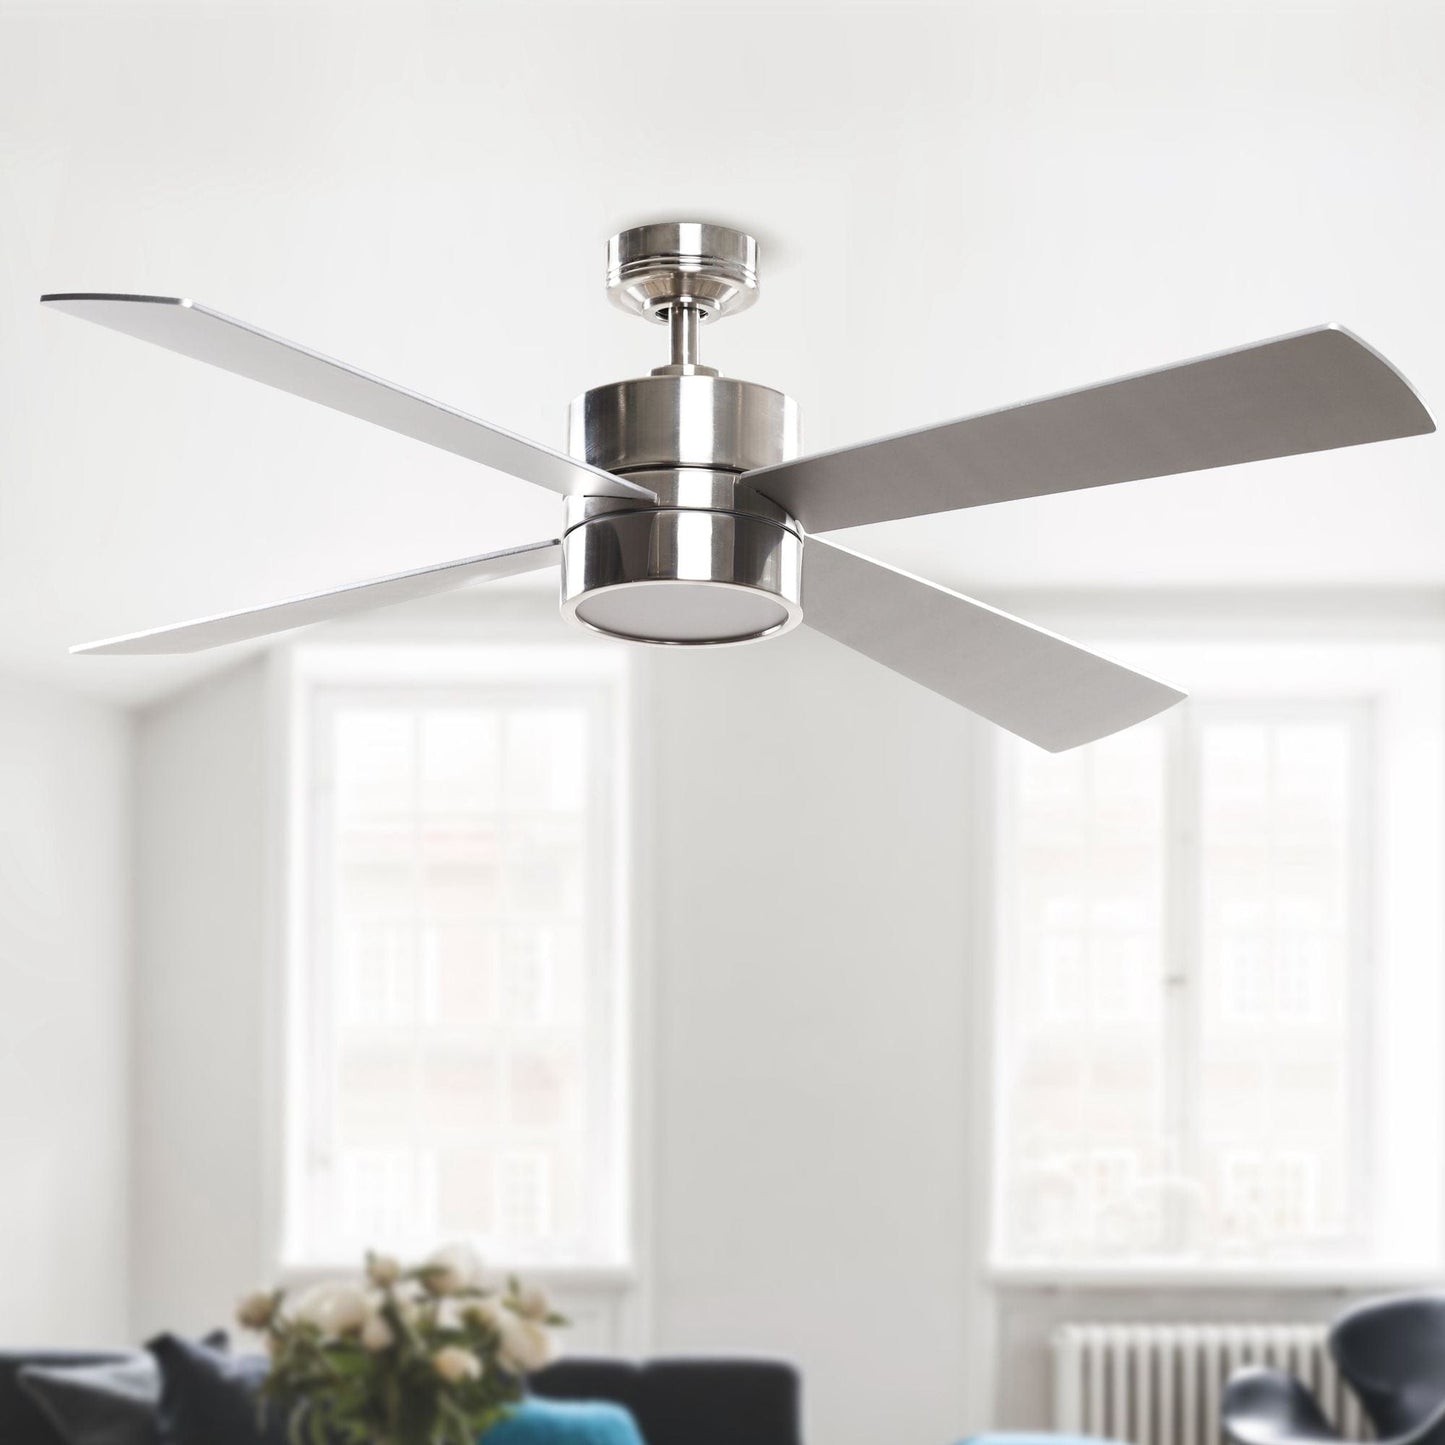 Parrot Uncle 52" Bucholz Industrial Downrod Mount Reversible Ceiling Fan with Lighting and Remote Control